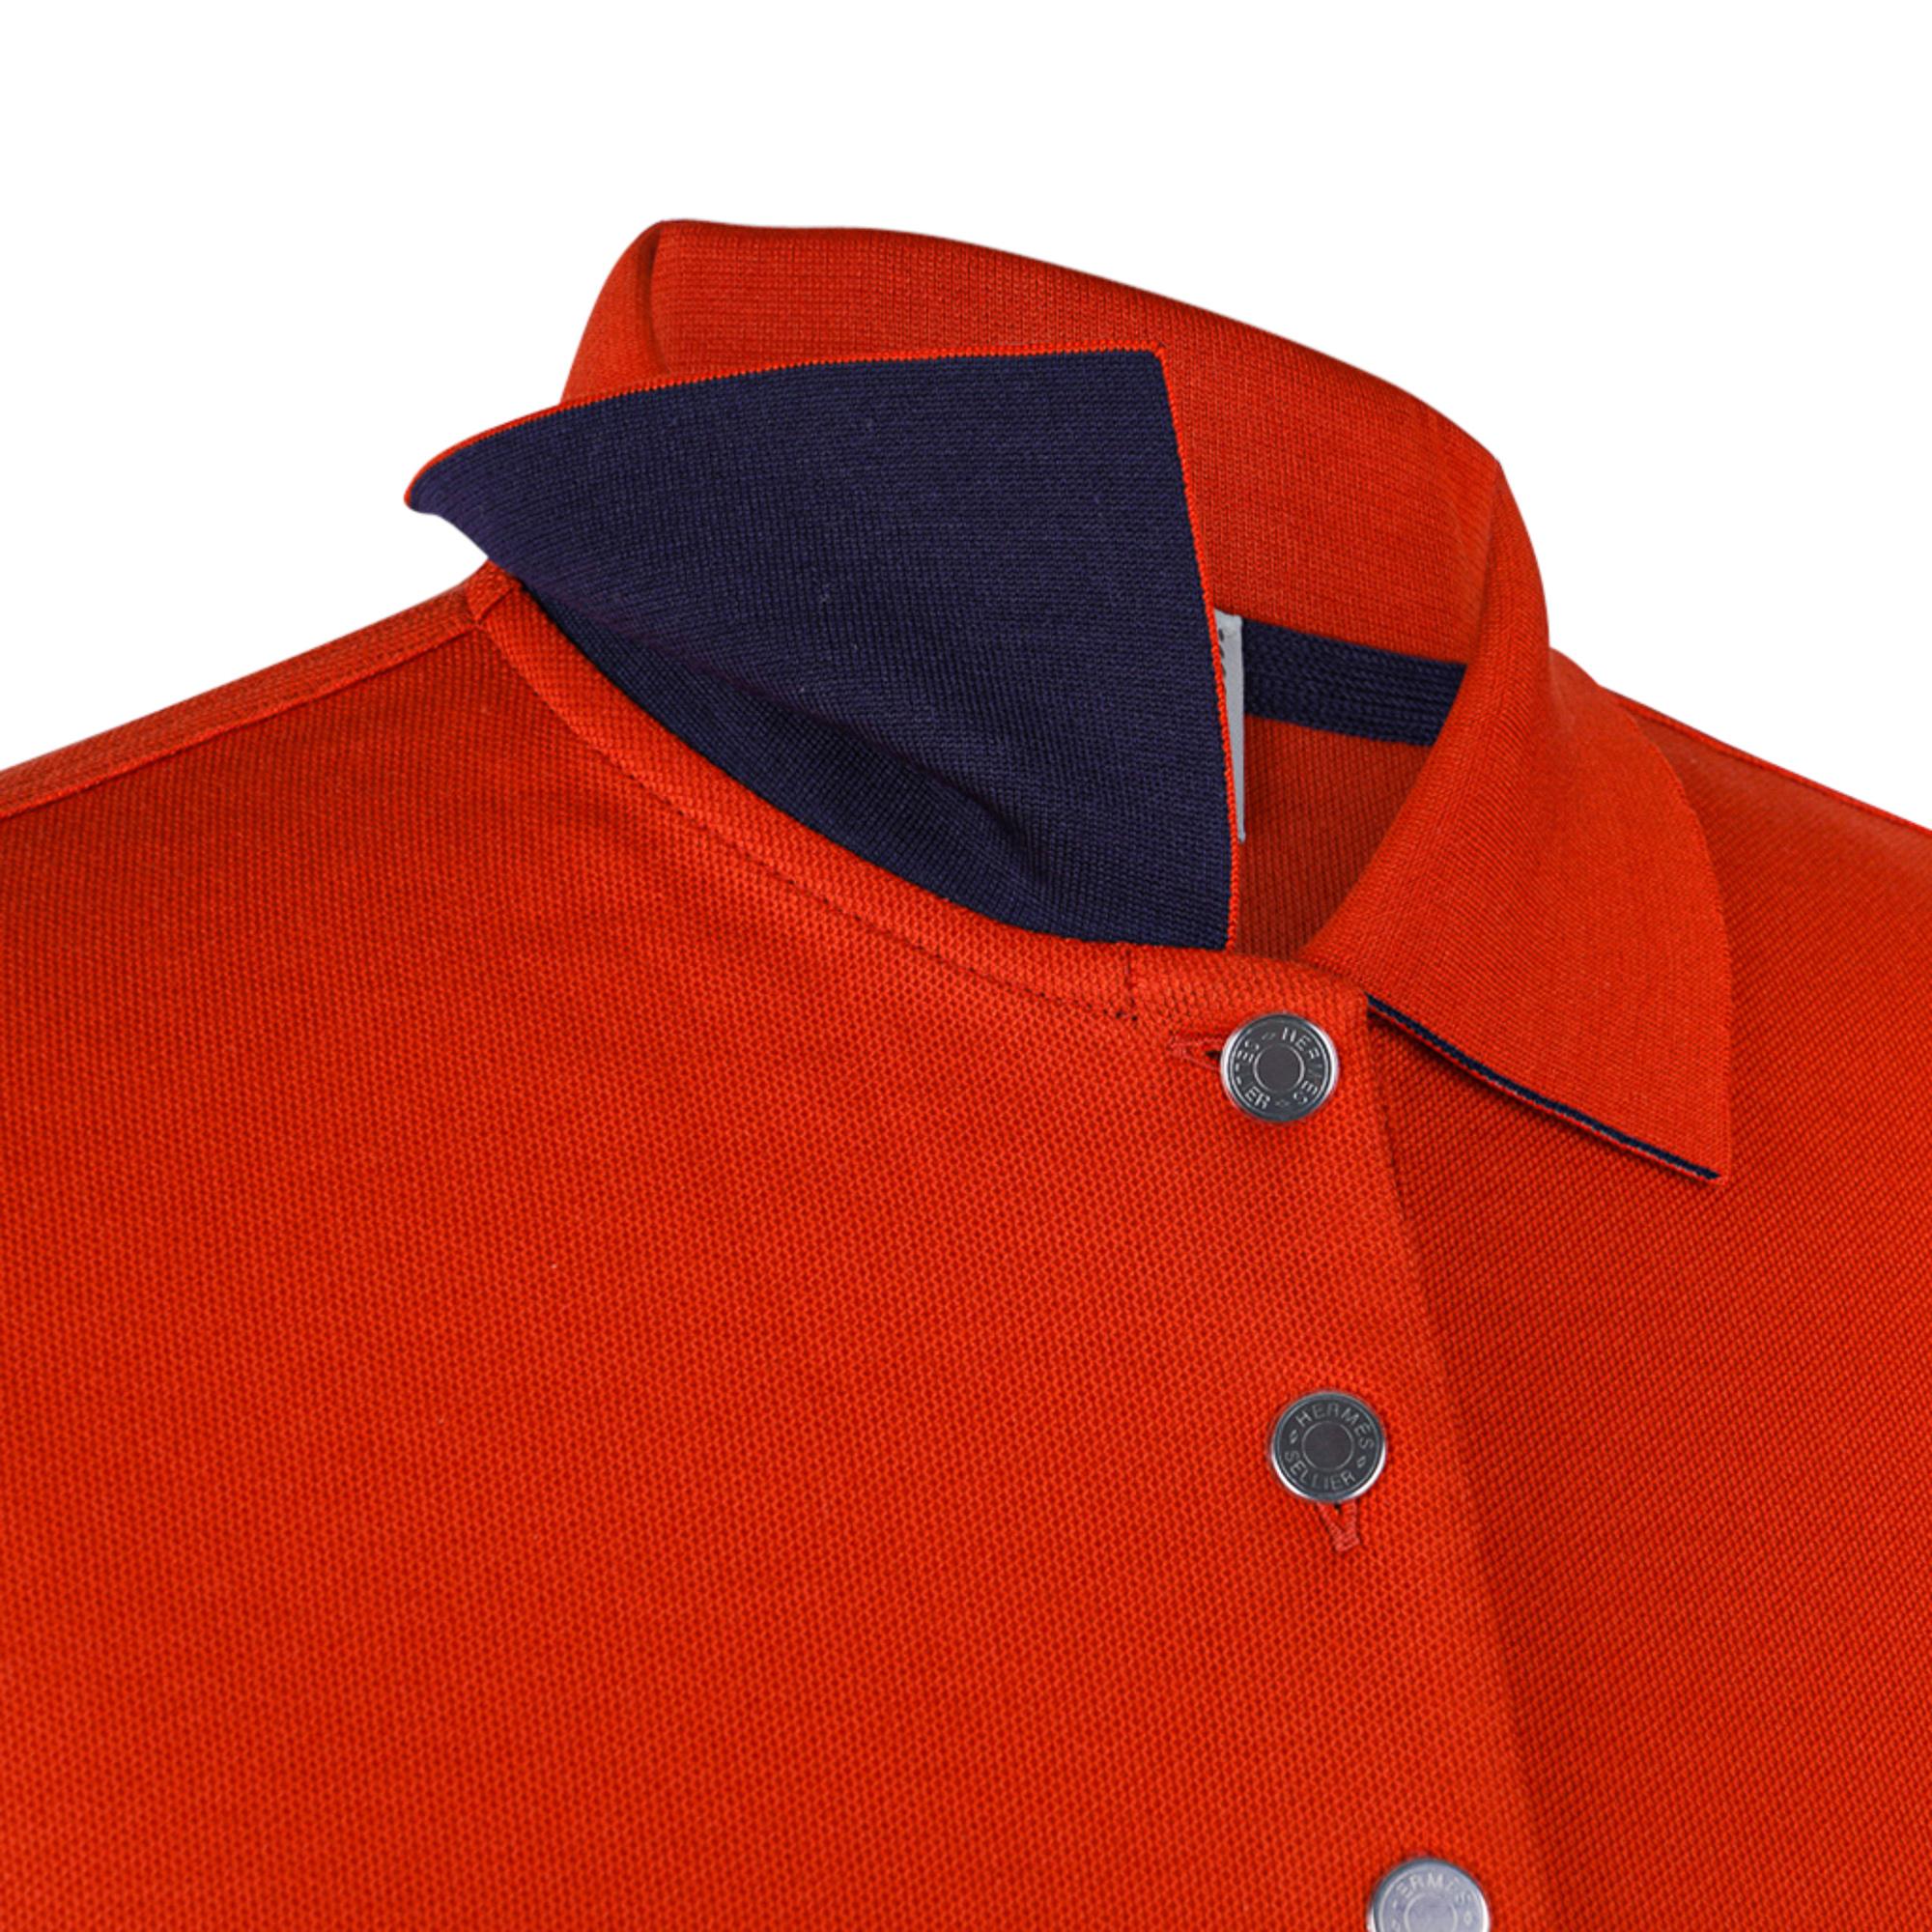 Mightychic offers an Hermes Women's Double Jeu Technical Polo features in Orange Feu with Navy Edging.
Contrasting Navy edging on collar, sleeve and on vents.
Designed for the rider in a straight cut with breathable fabric.
Interior is cotton that